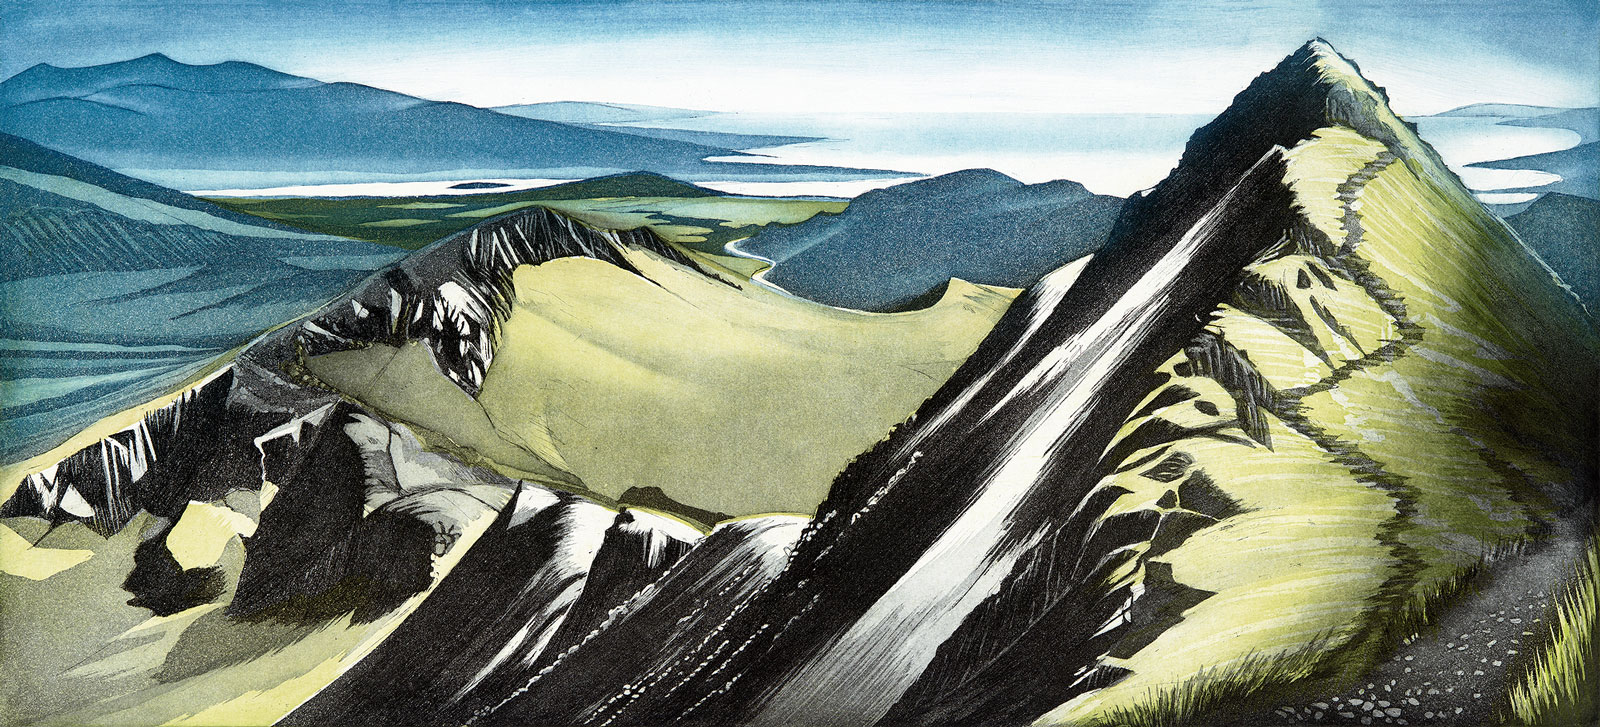 'High in the Hills' by Morna Rhys